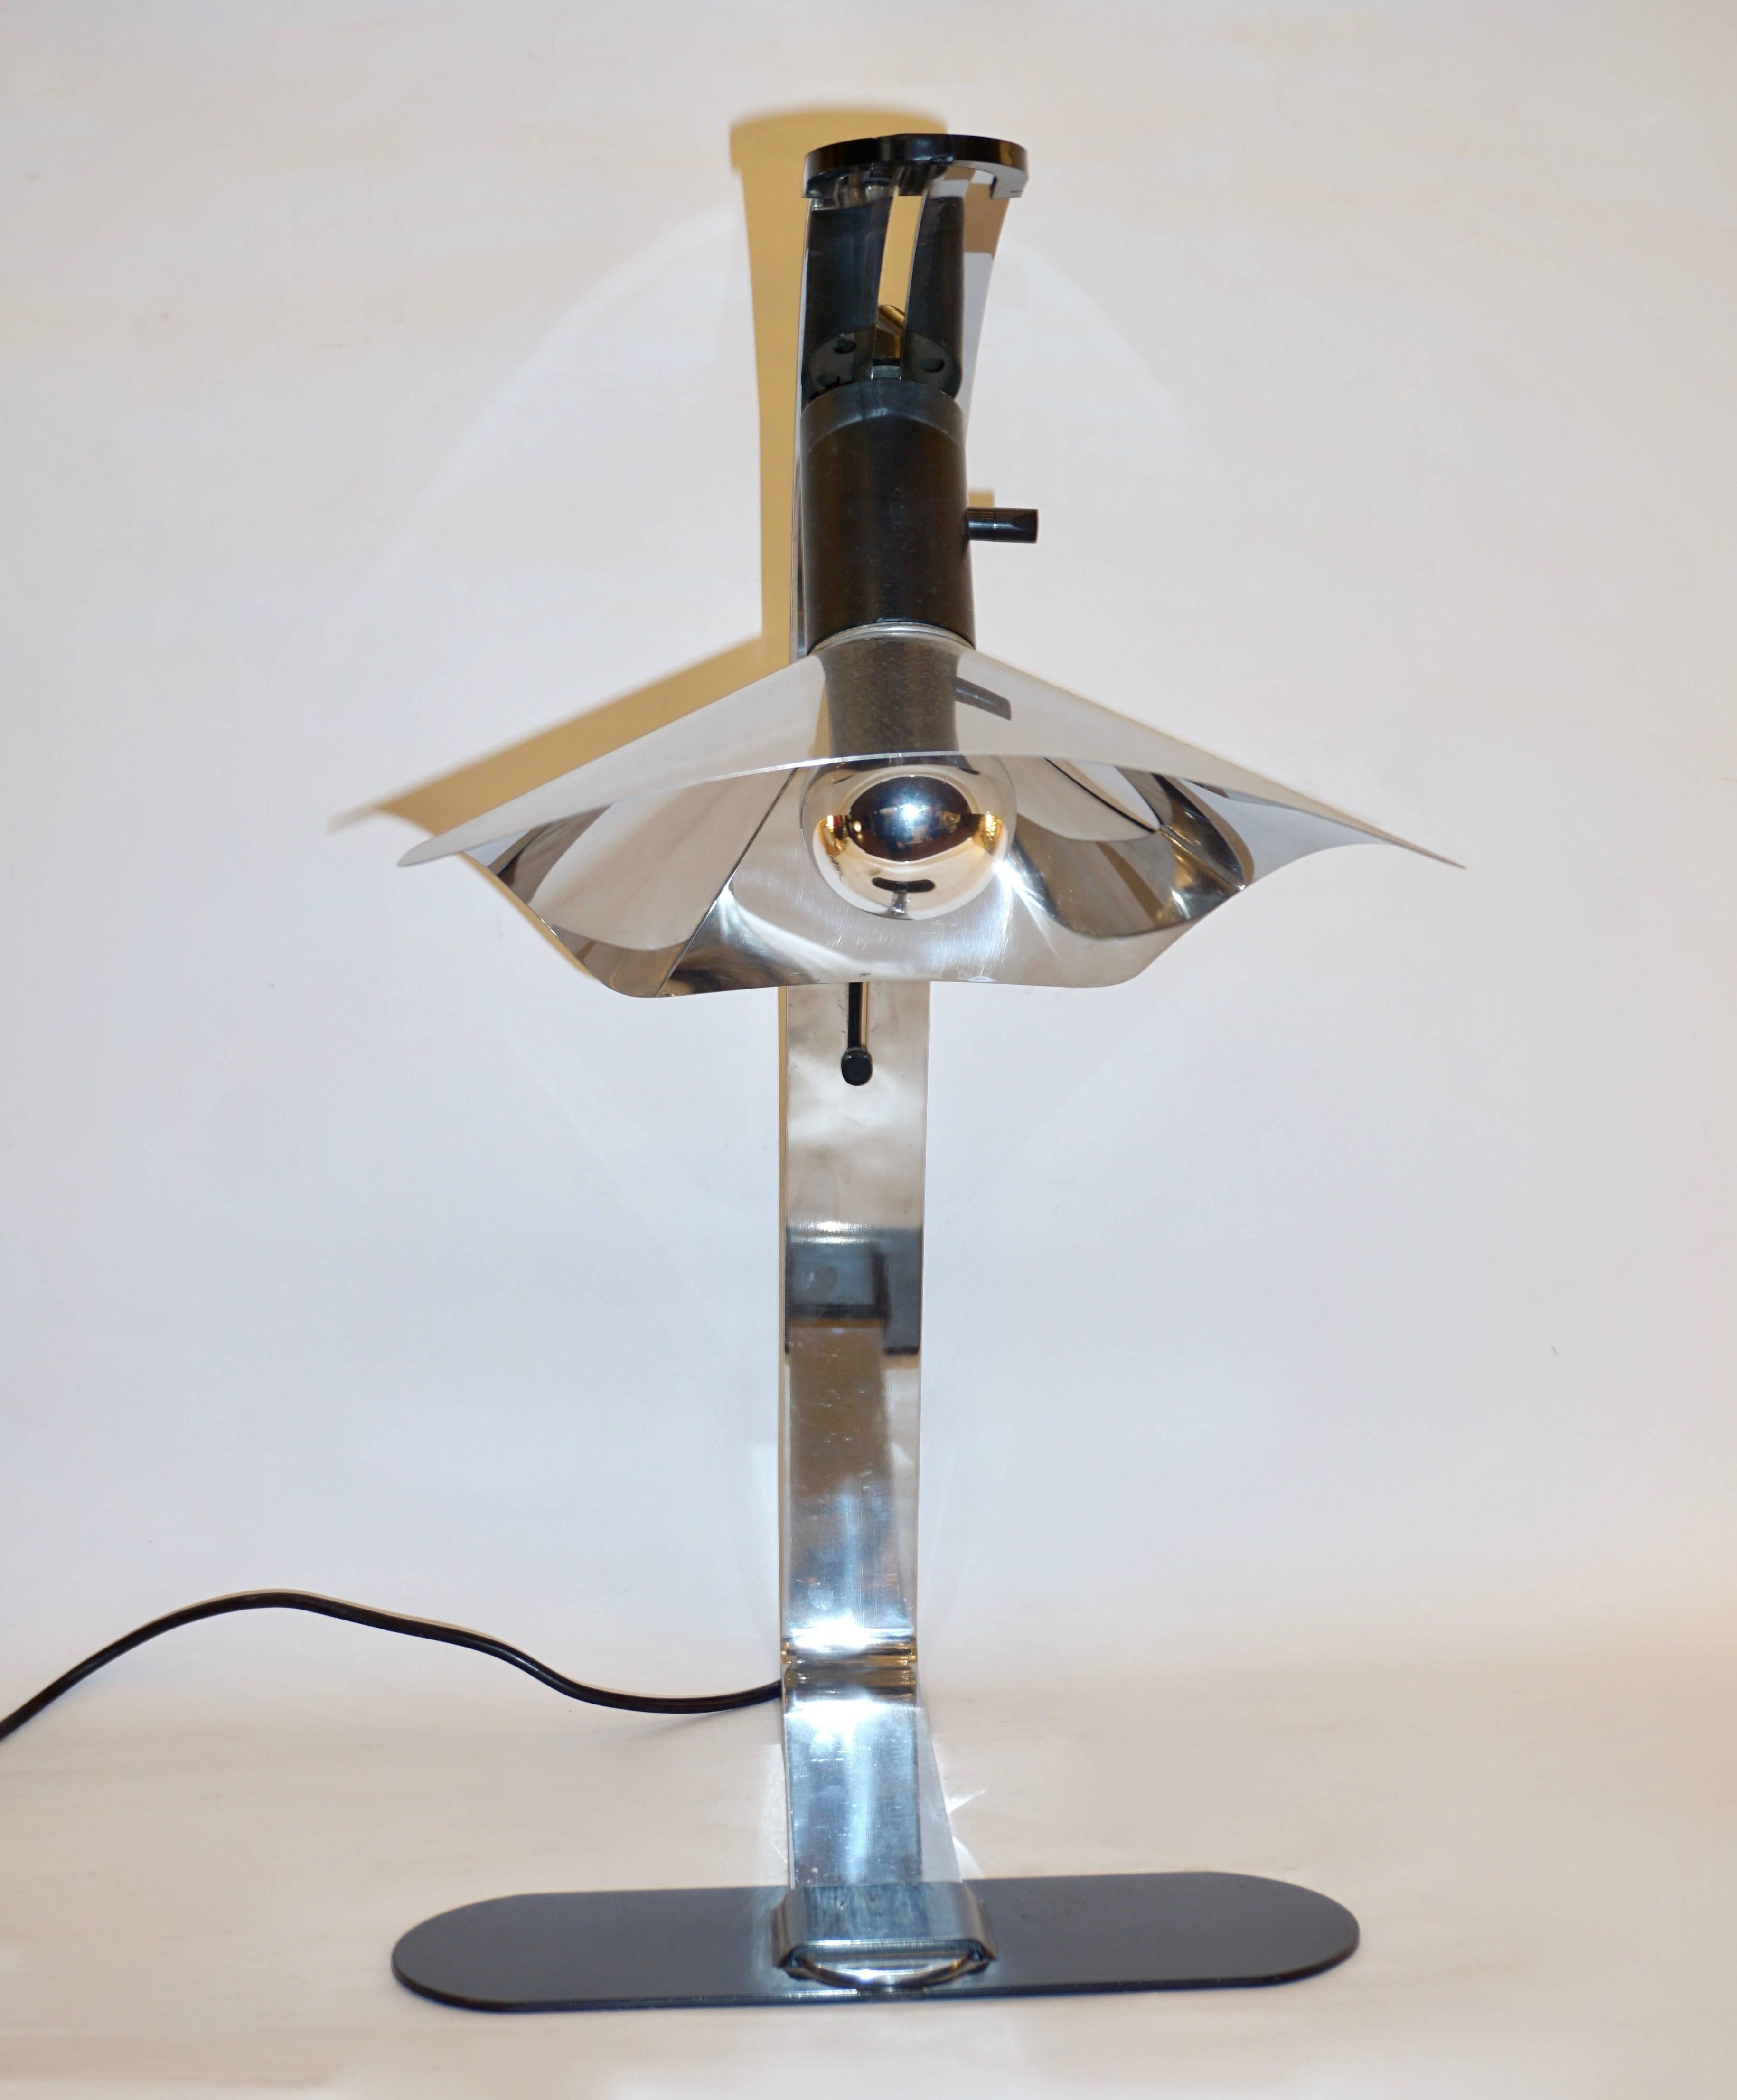 Hand-Crafted Grignani for Luci, 1970s, Italian Vintage Adjustable Black and Nickel Desk Lamp